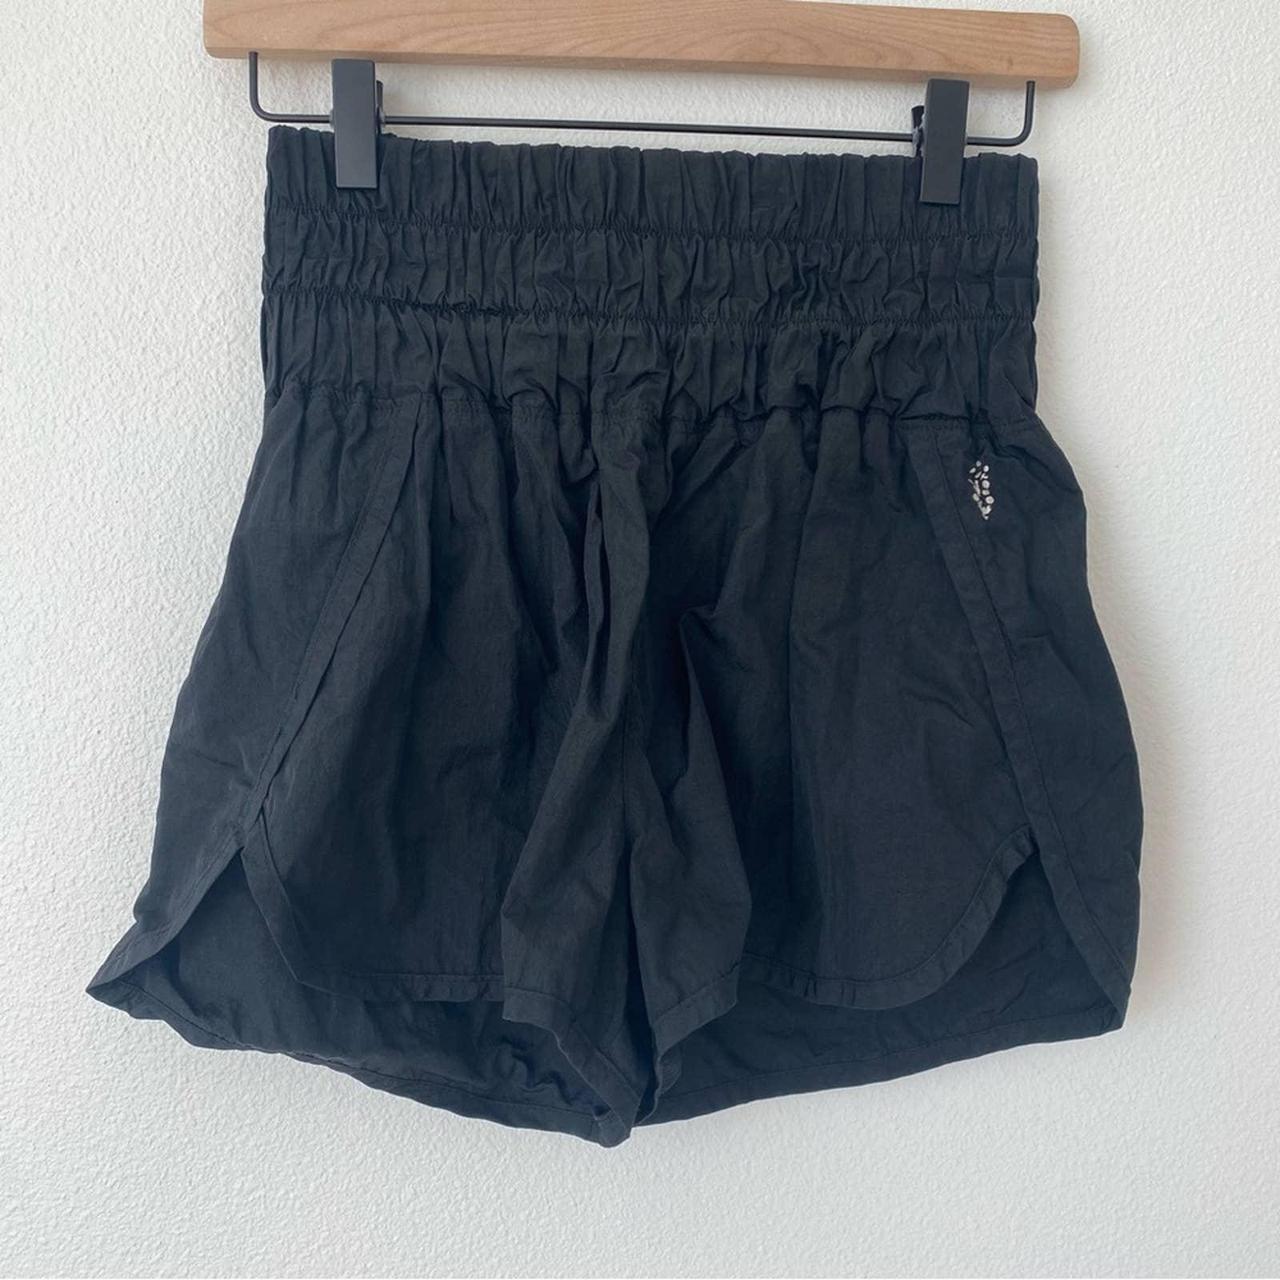 Free People Movement - The Way Home Shorts - Black